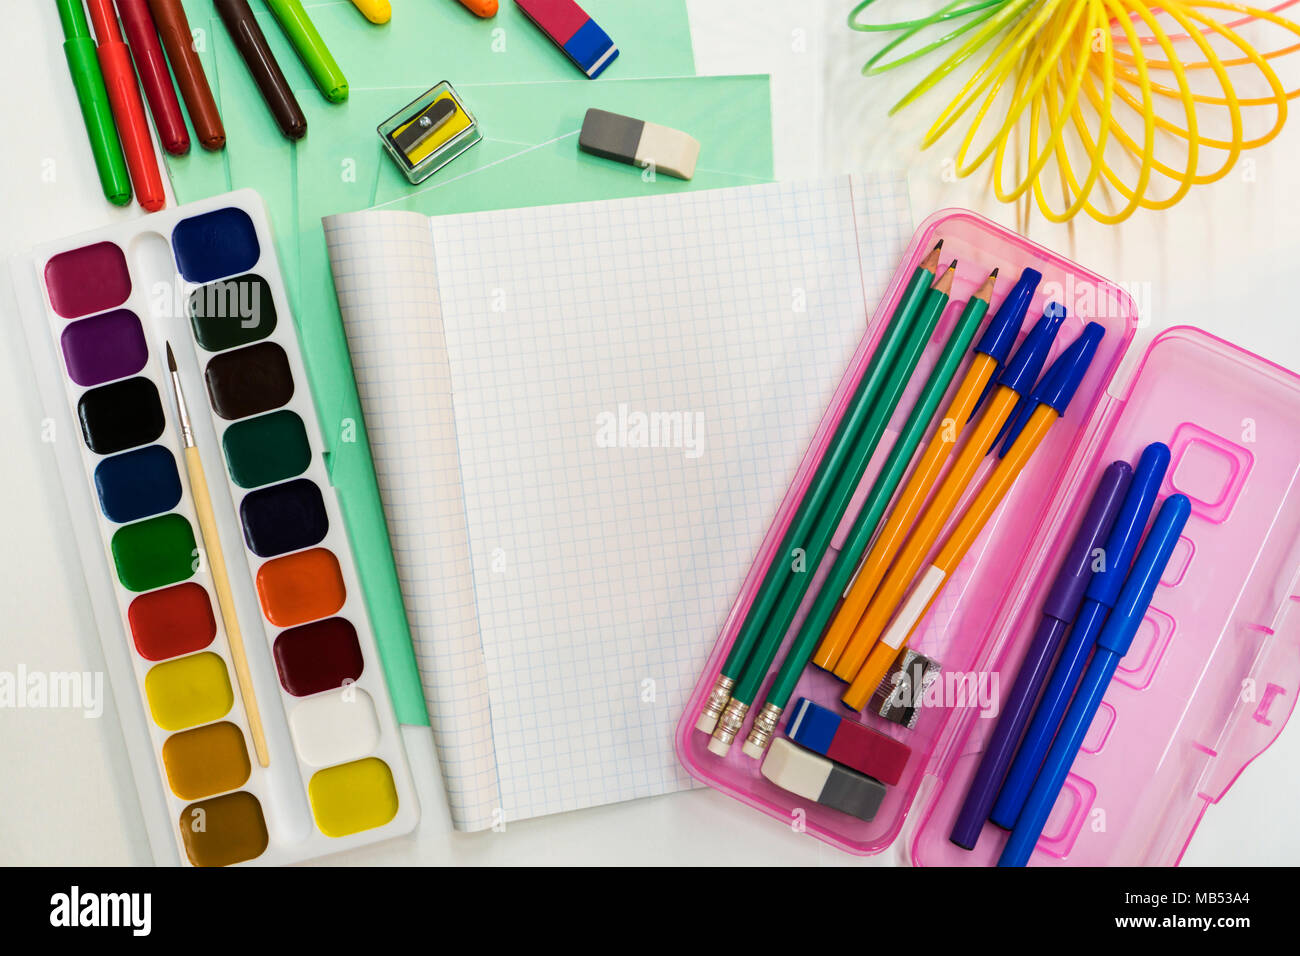 Pencil Case With School Supplies Stock Photo - Download Image Now